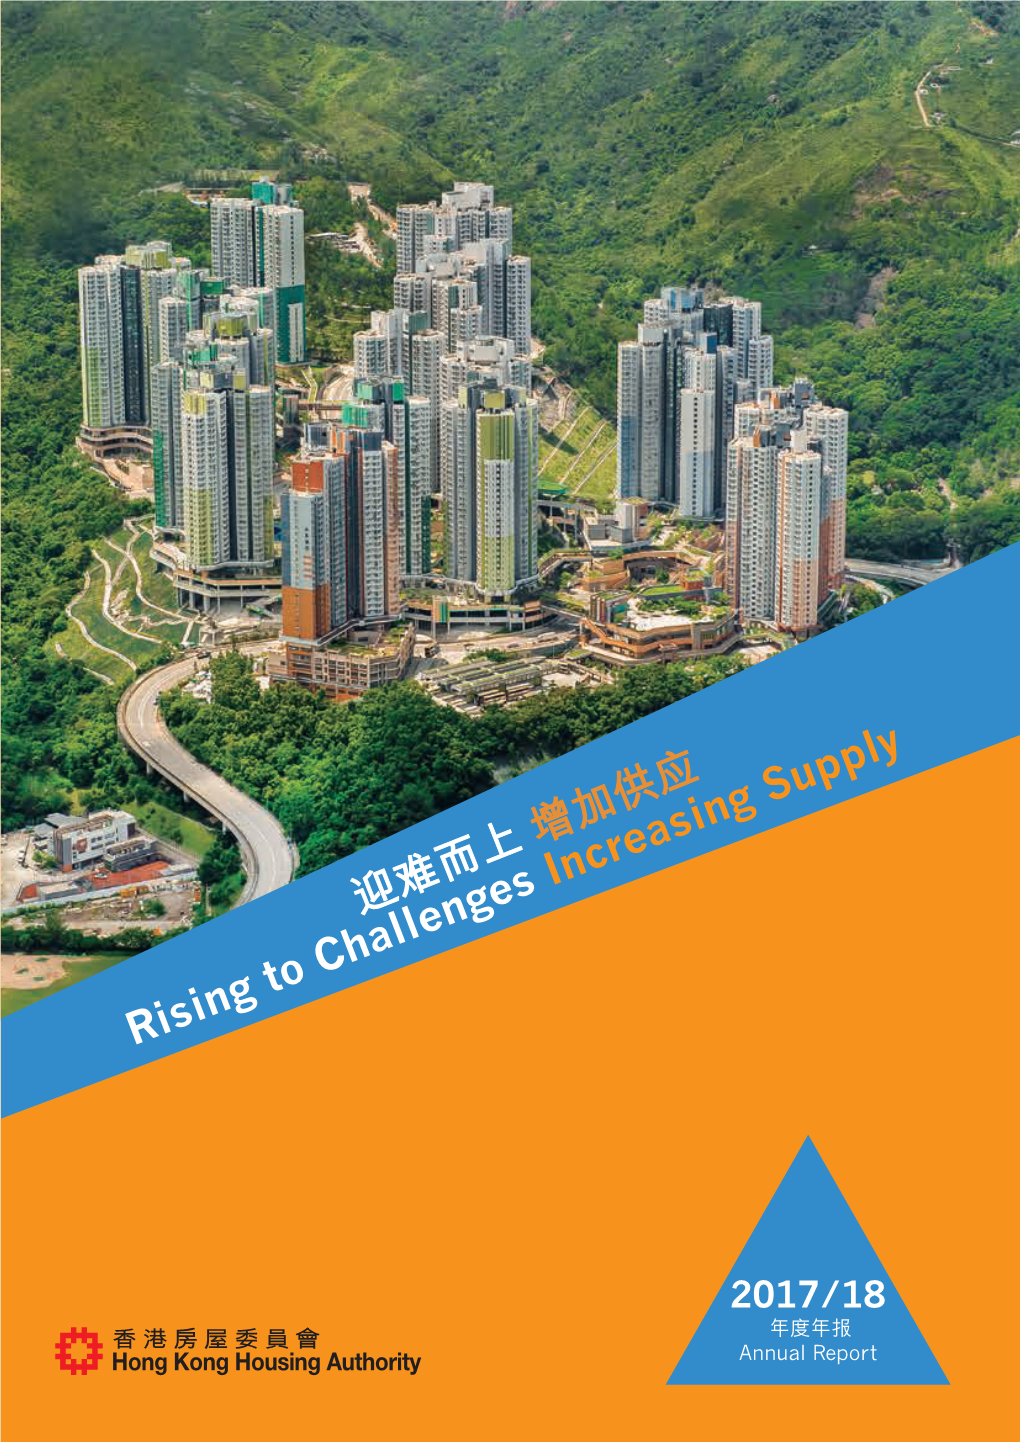 Hong Kong Housing Authority Annual Report 2017/18